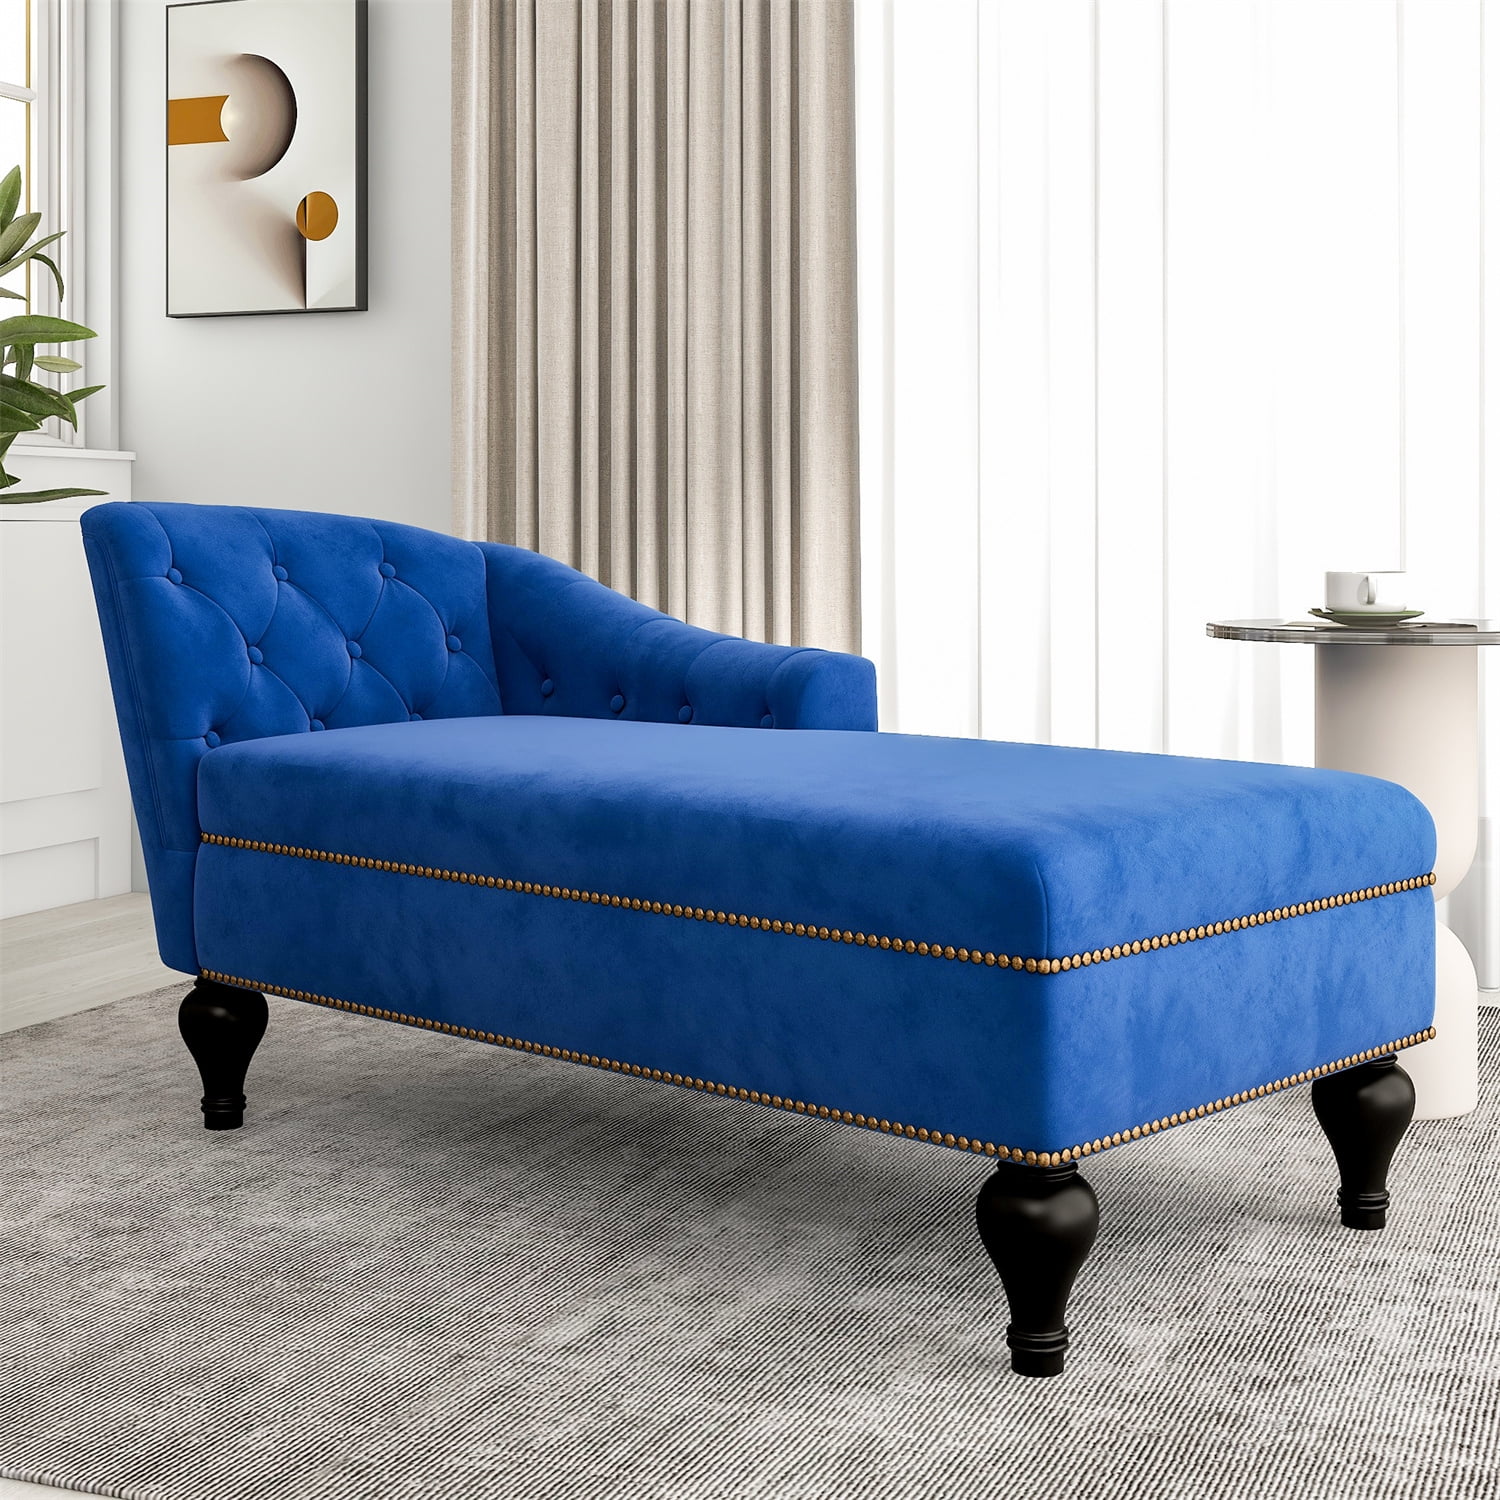 Modern Chaise Lounge, Tufted Botton Upholstered Velvet Sofa Chair , Elegant  Victorian Vintage Style Sofa Sleeper Lounge with Nailhead Trim and 